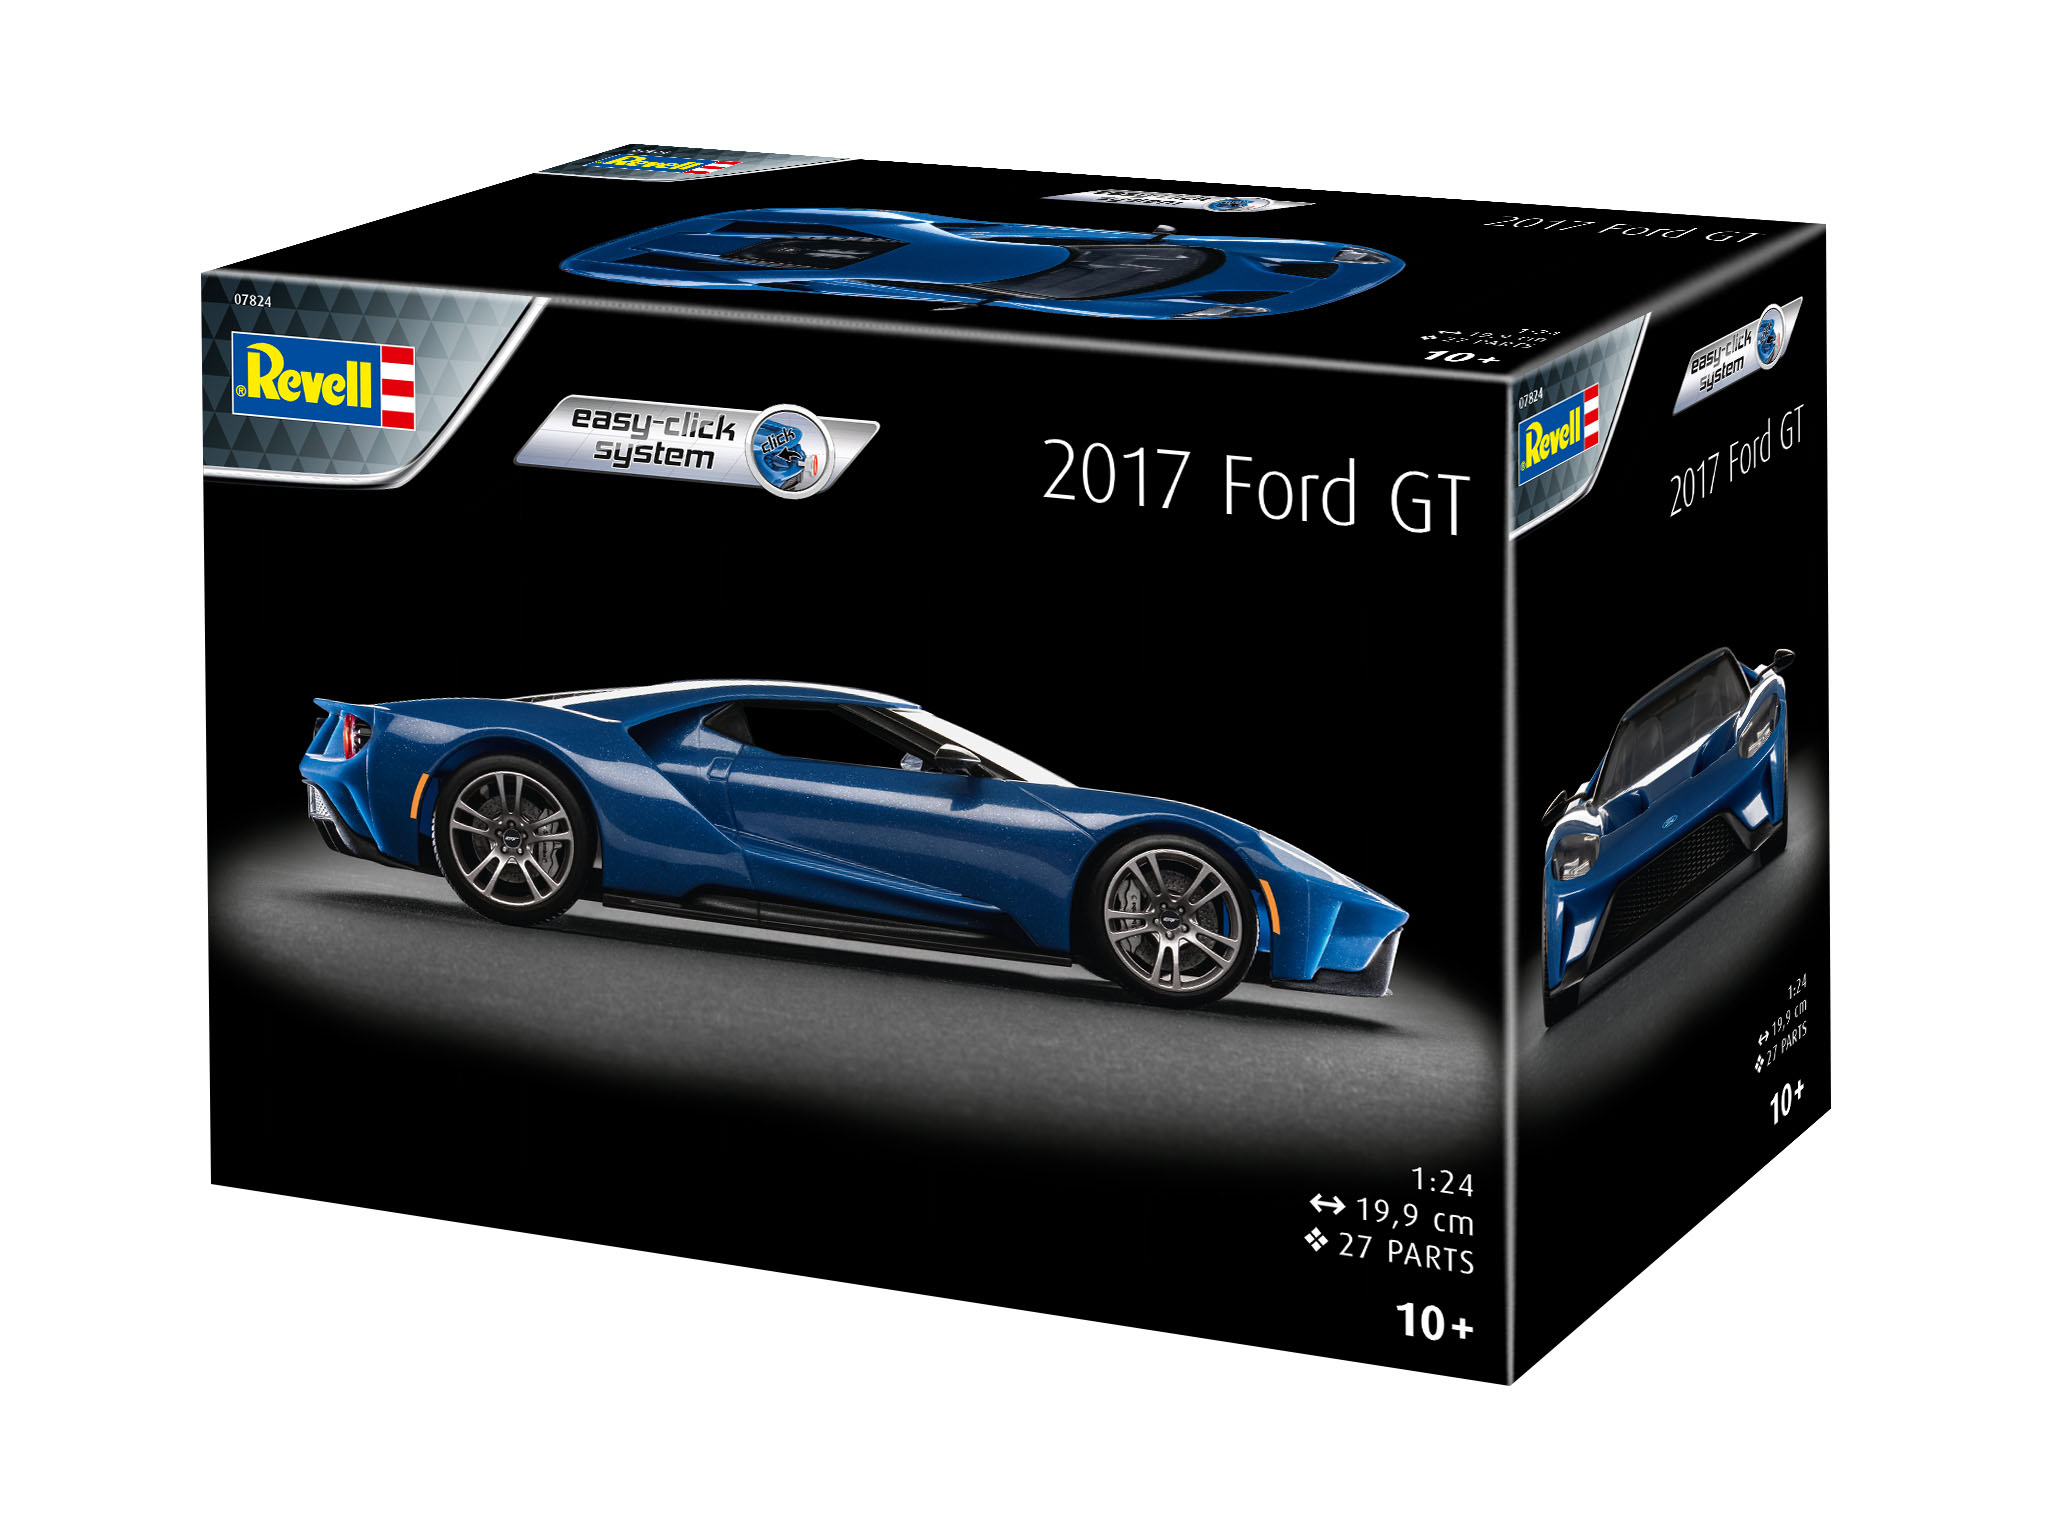 2017 Ford GT - 07824